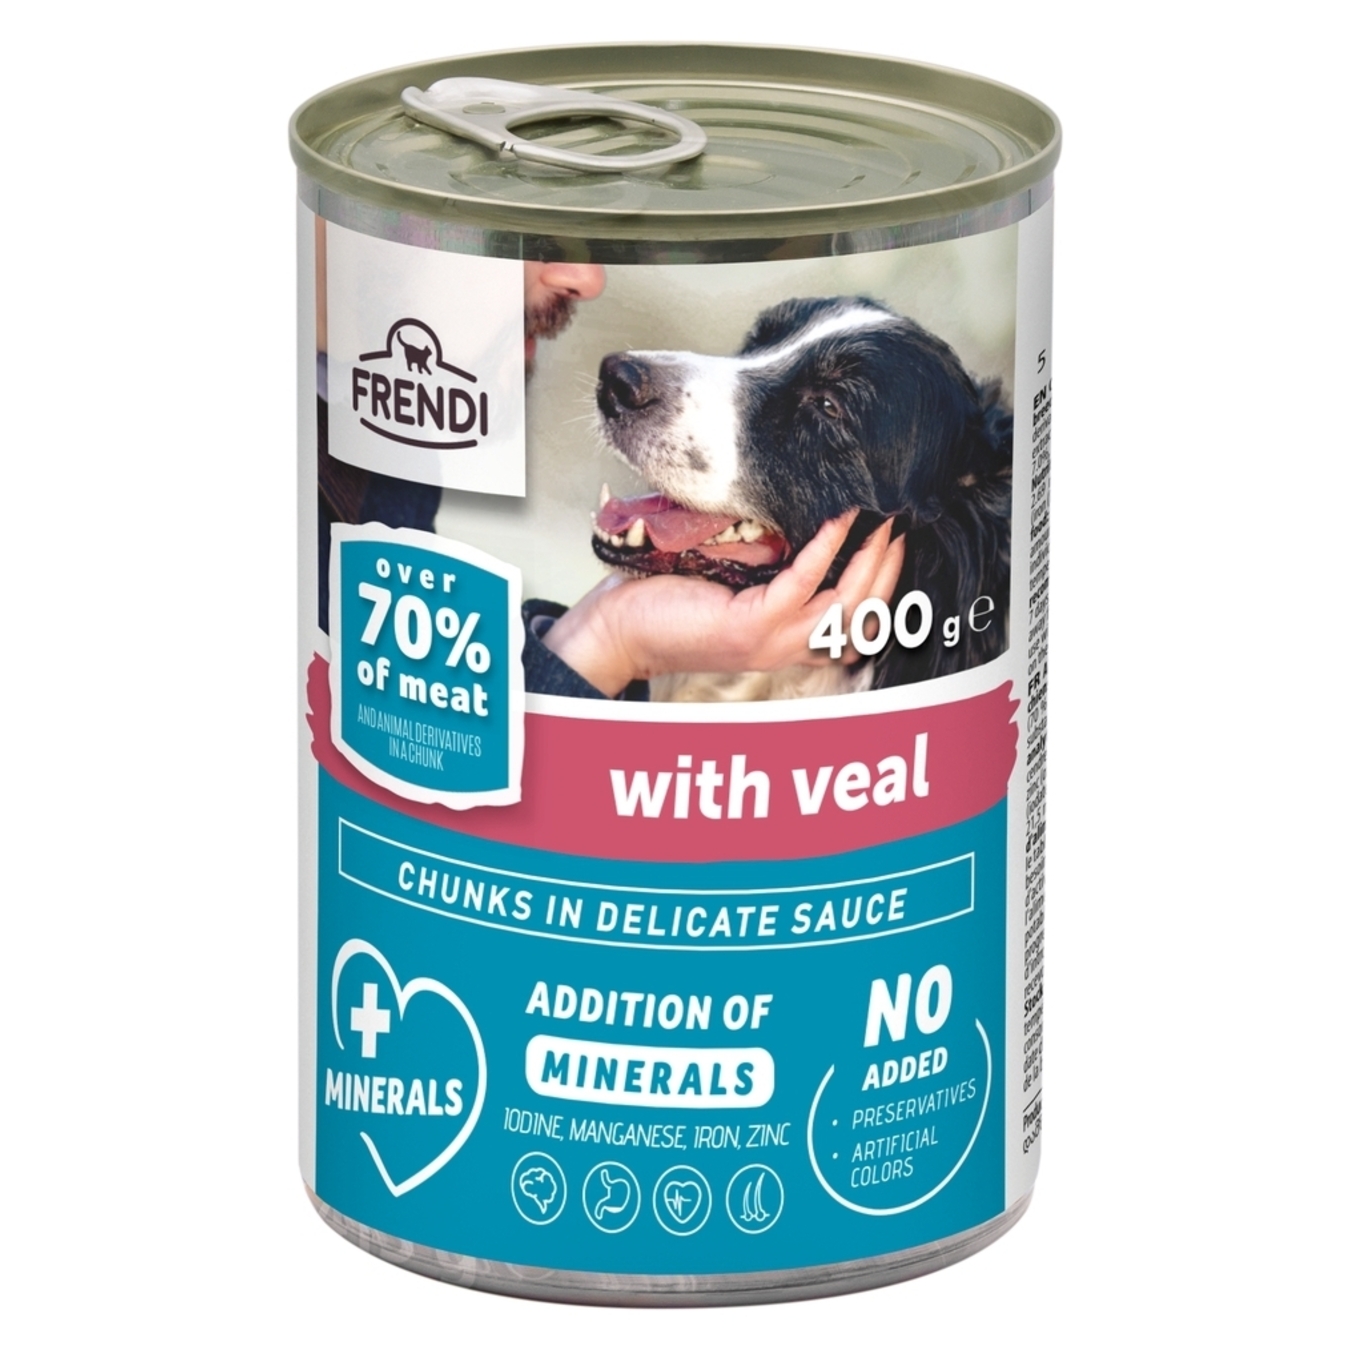 Food for dogs Frendi pieces of veal in sauce canned 400g